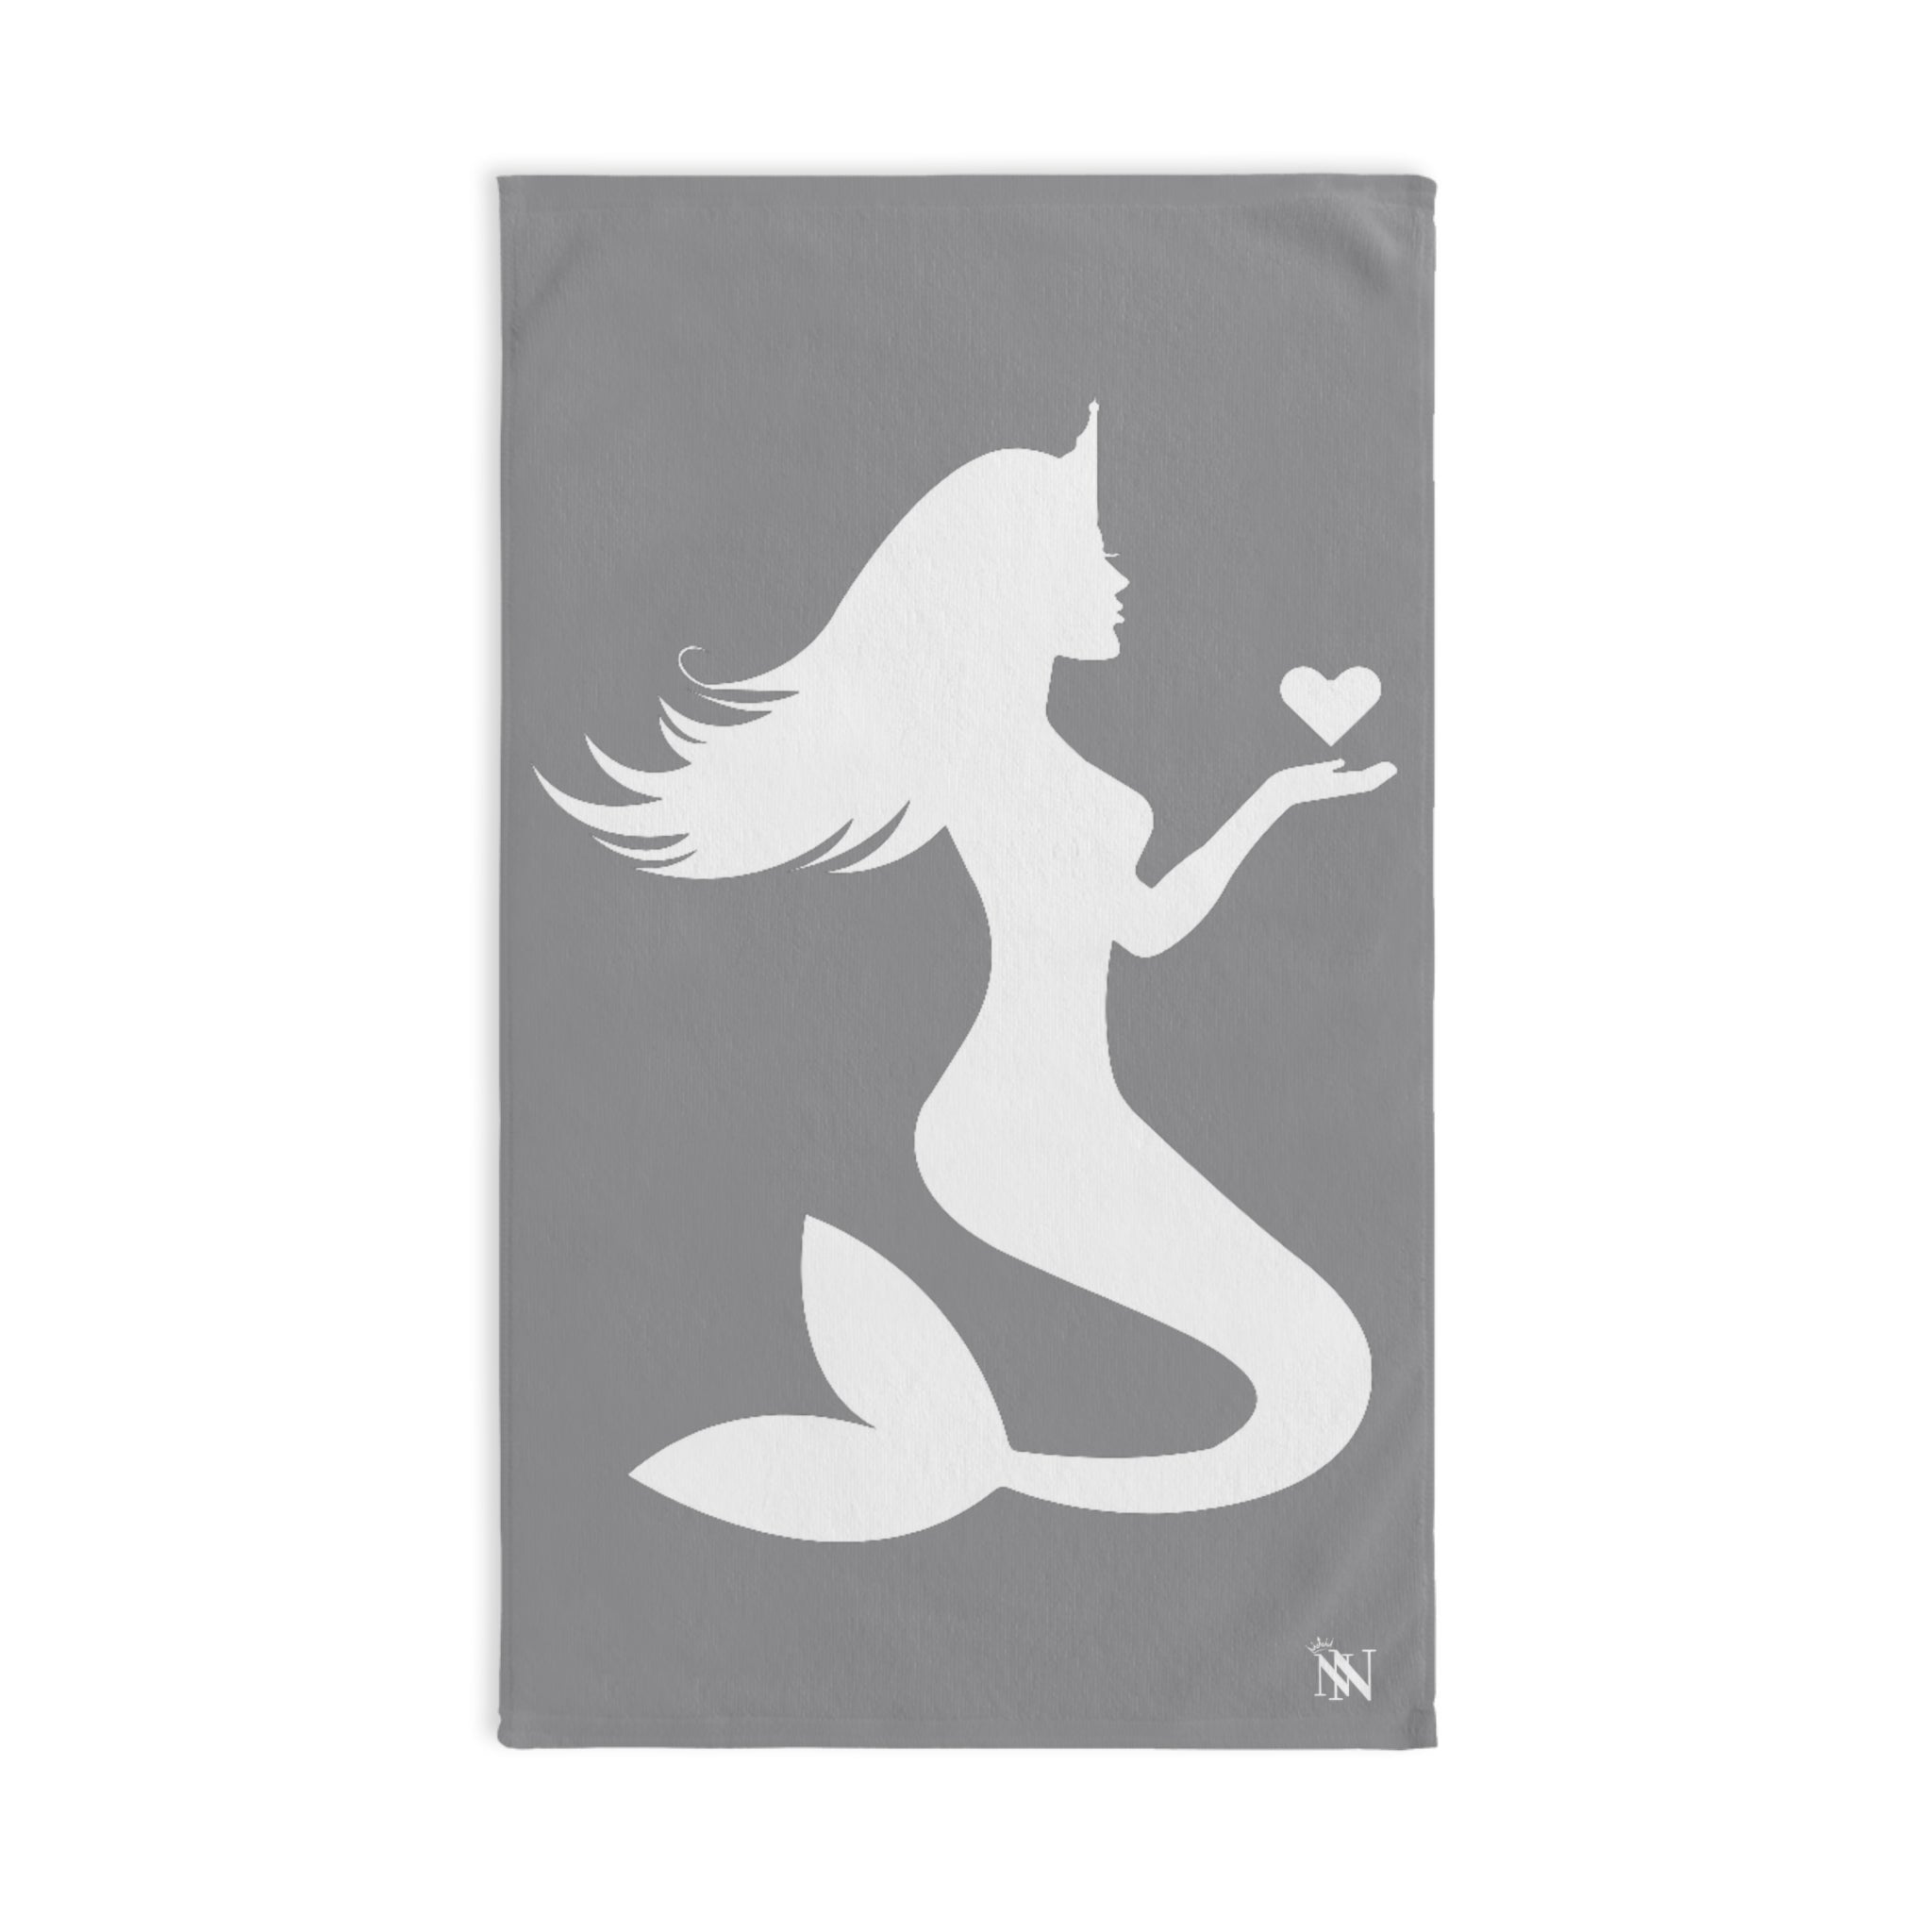 Pray Mermaid HeartGrey | Anniversary Wedding, Christmas, Valentines Day, Birthday Gifts for Him, Her, Romantic Gifts for Wife, Girlfriend, Couples Gifts for Boyfriend, Husband NECTAR NAPKINS